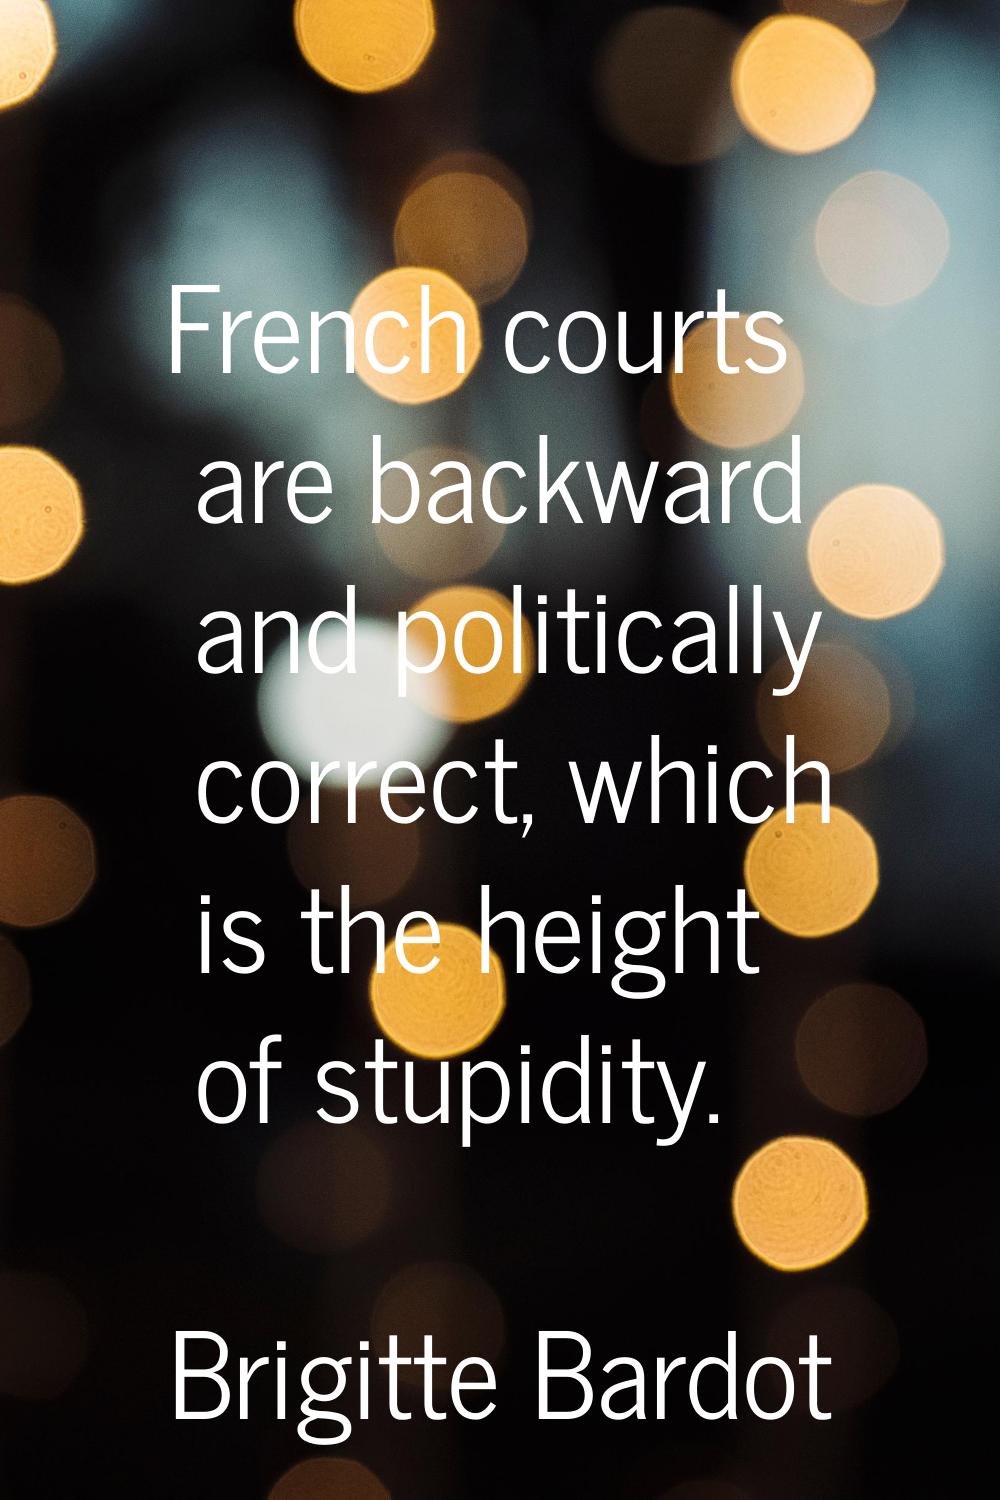 French courts are backward and politically correct, which is the height of stupidity.